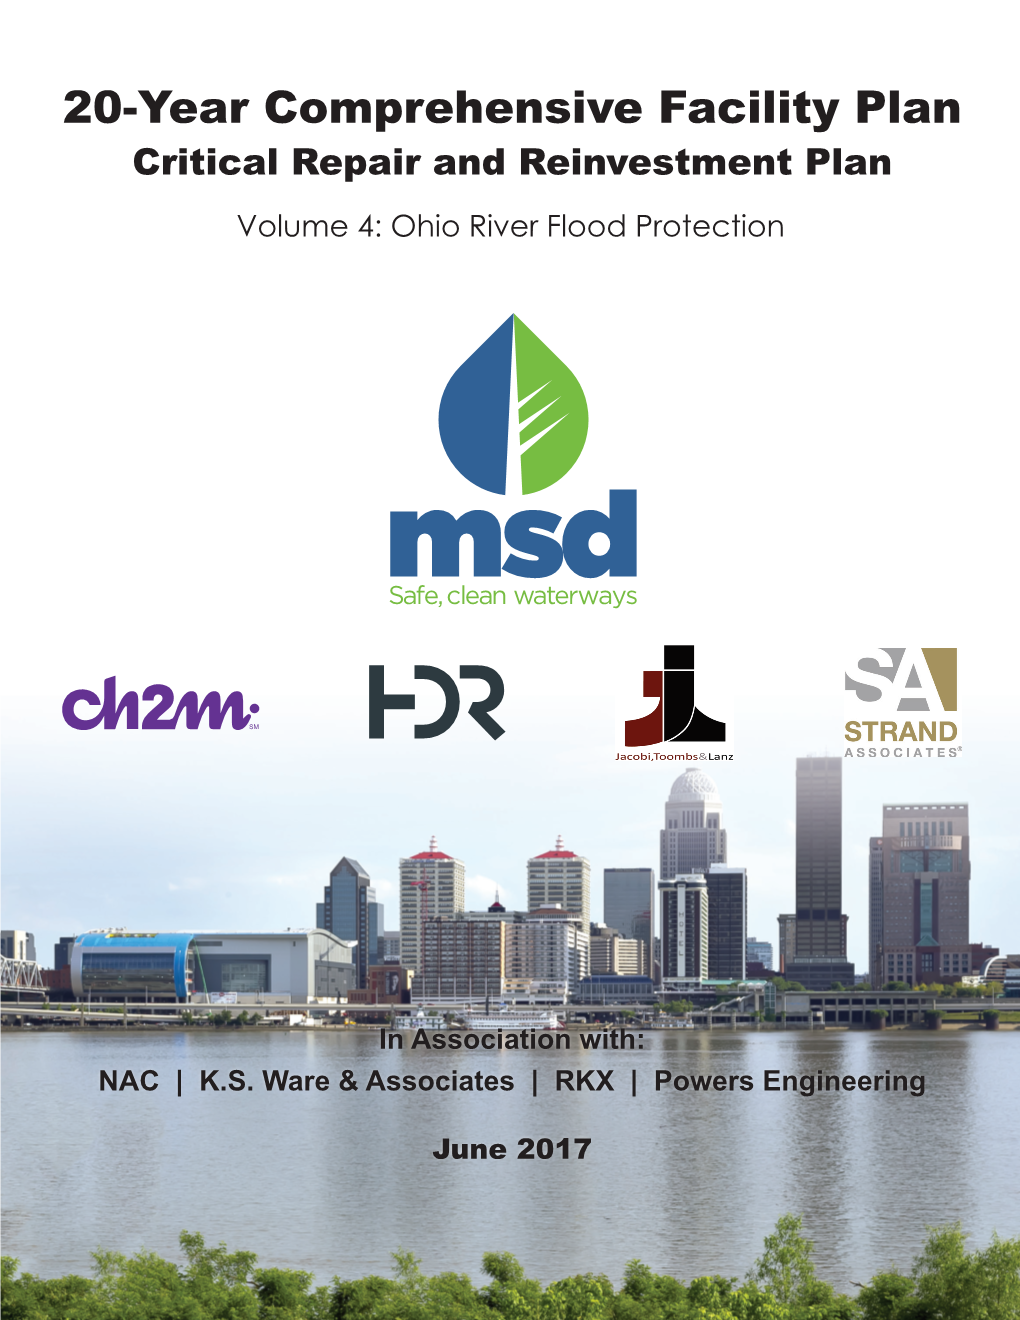 20-Year Comprehensive Facility Plan Critical Repair and Reinvestment Plan Volume 4: Ohio River Flood Protection